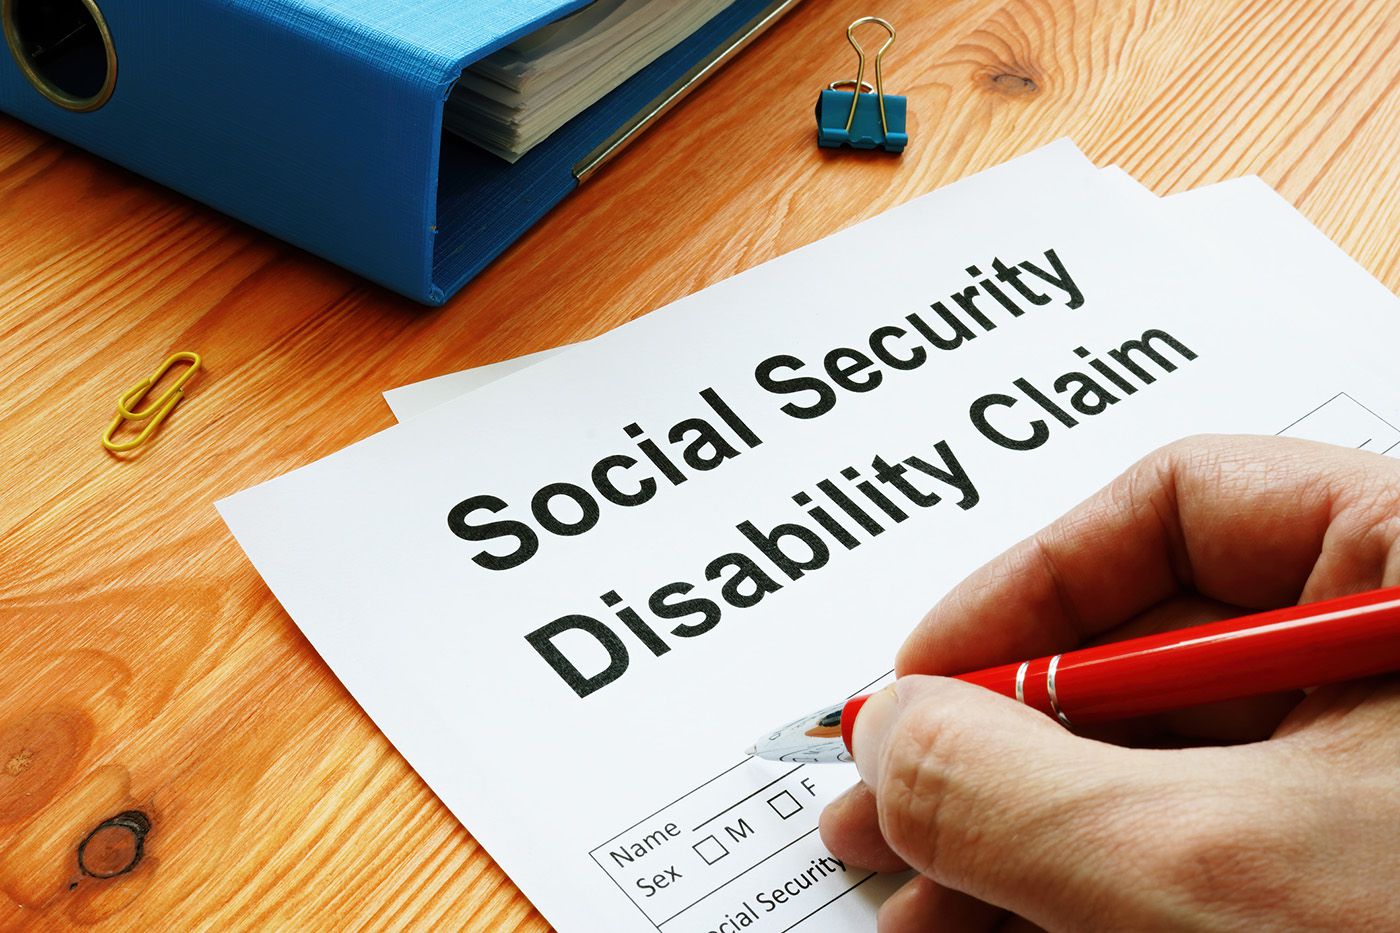 Disability benefits: Theyre not welfare, but difficult to get